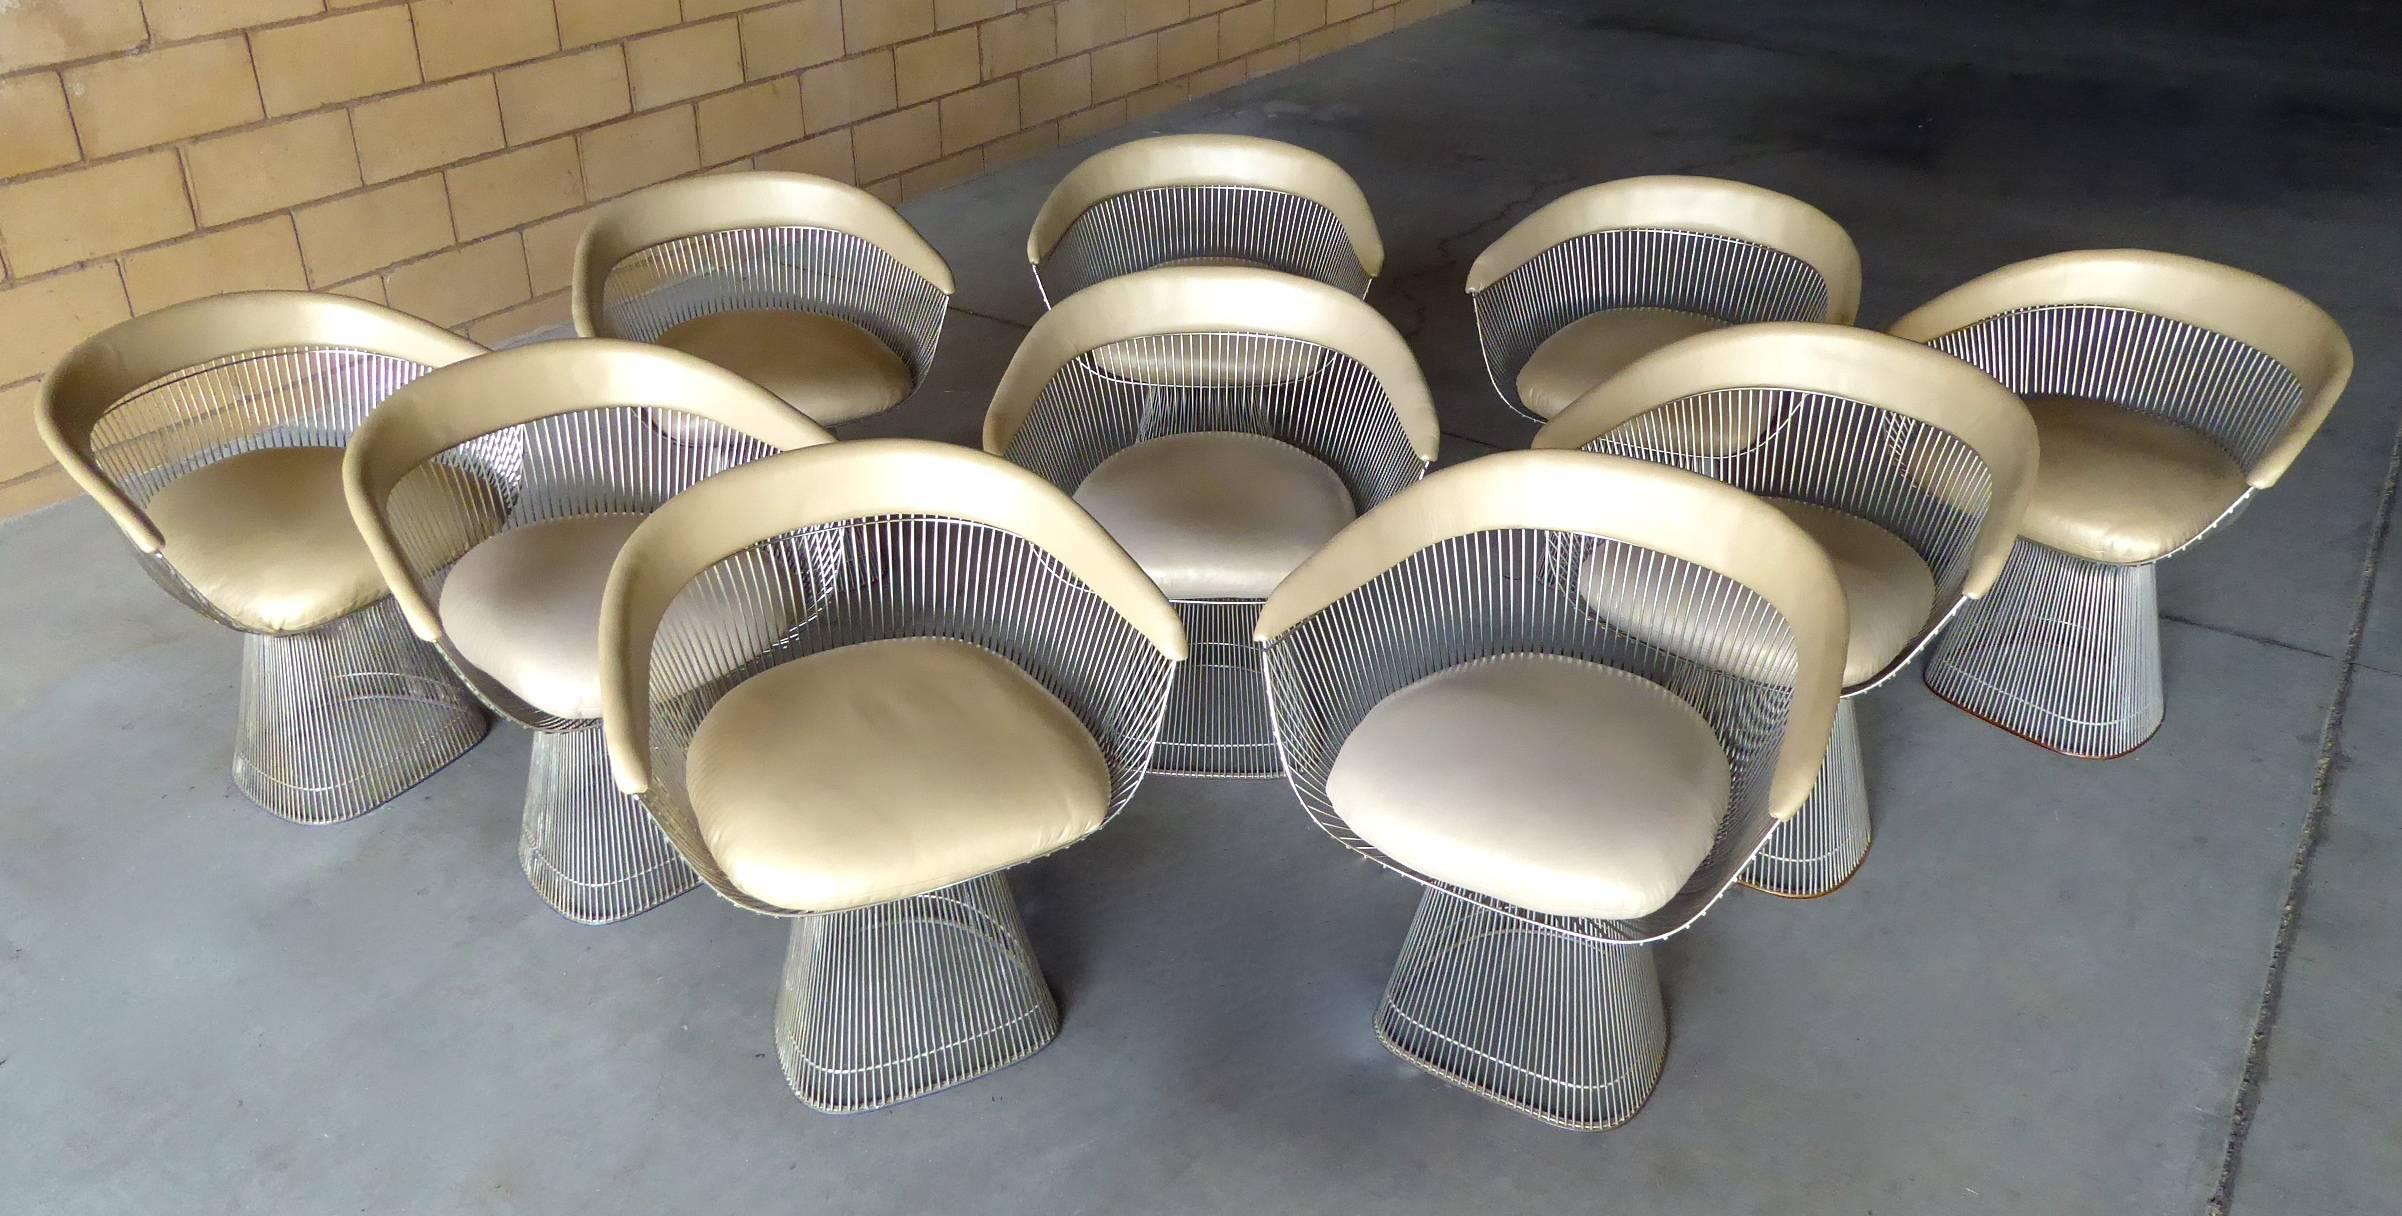 A superb set of ten nickel-plated dining chairs designed by Warren Platner for Knoll International in the 1960s. This set is from the 1980s and has been reupholstered in a soft, high-quality taupe colored leather. A matching set of this size is